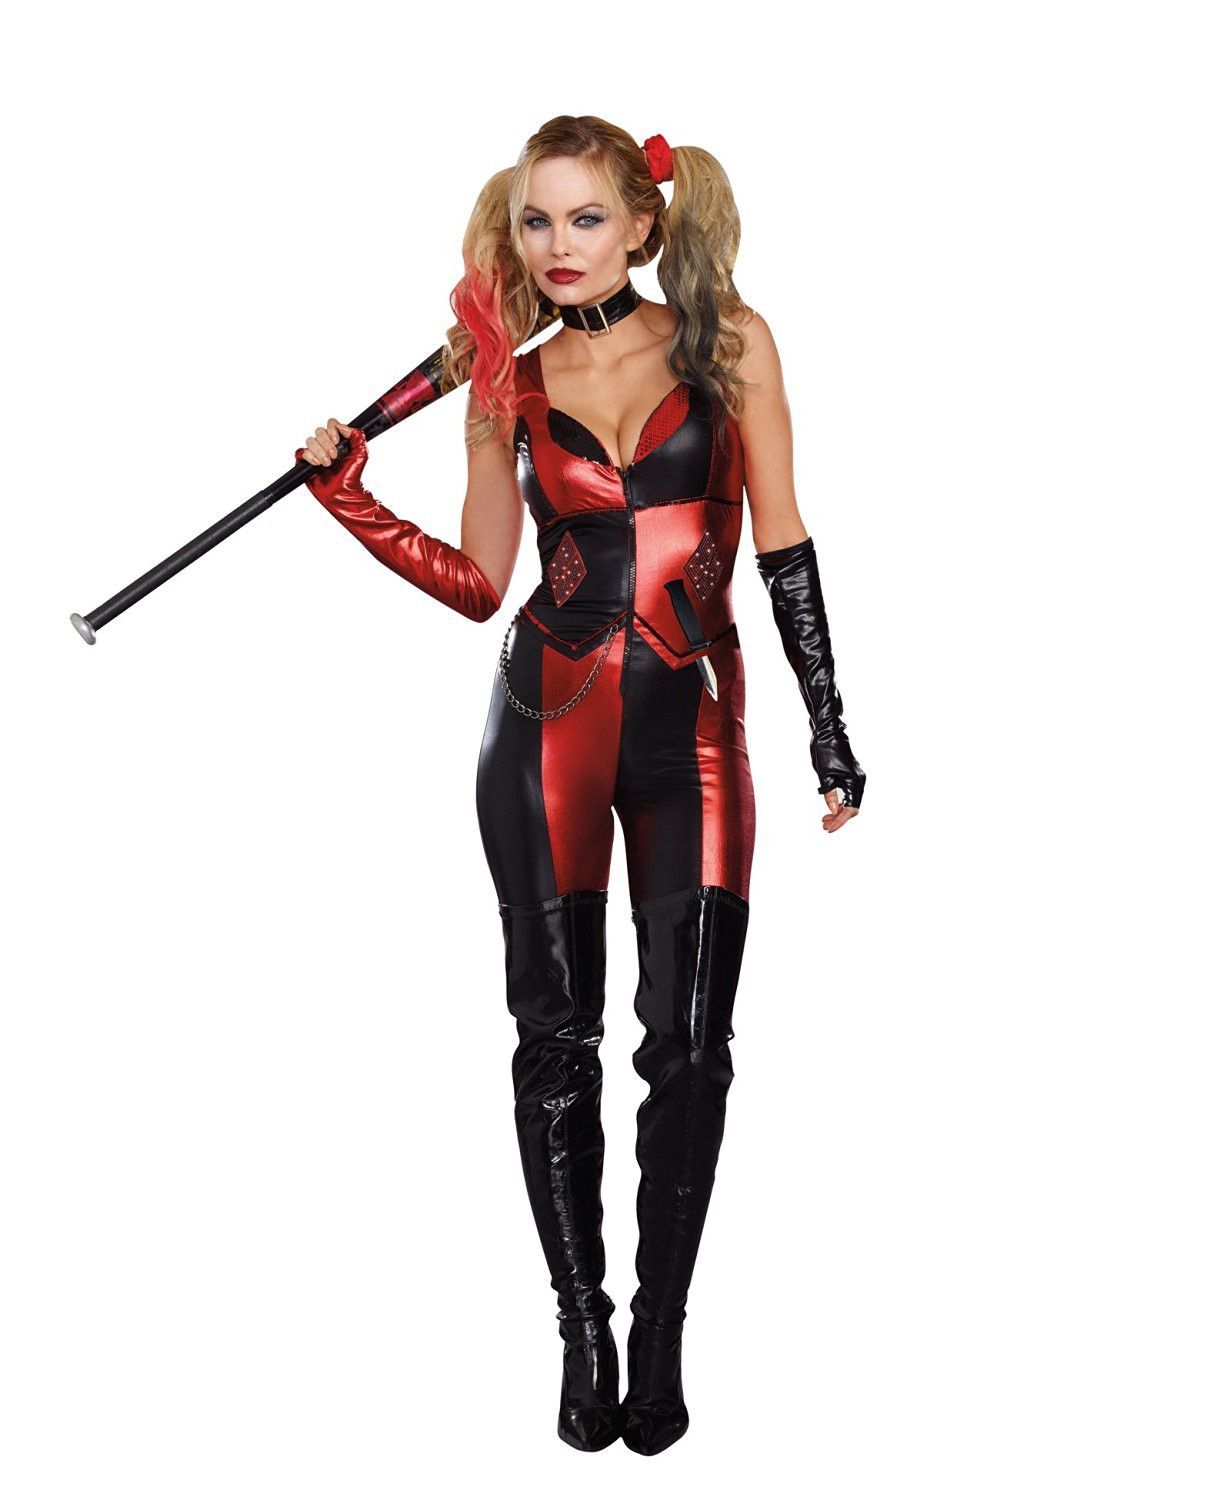 david dunfee reccomend harley quinn sexy halloween pic